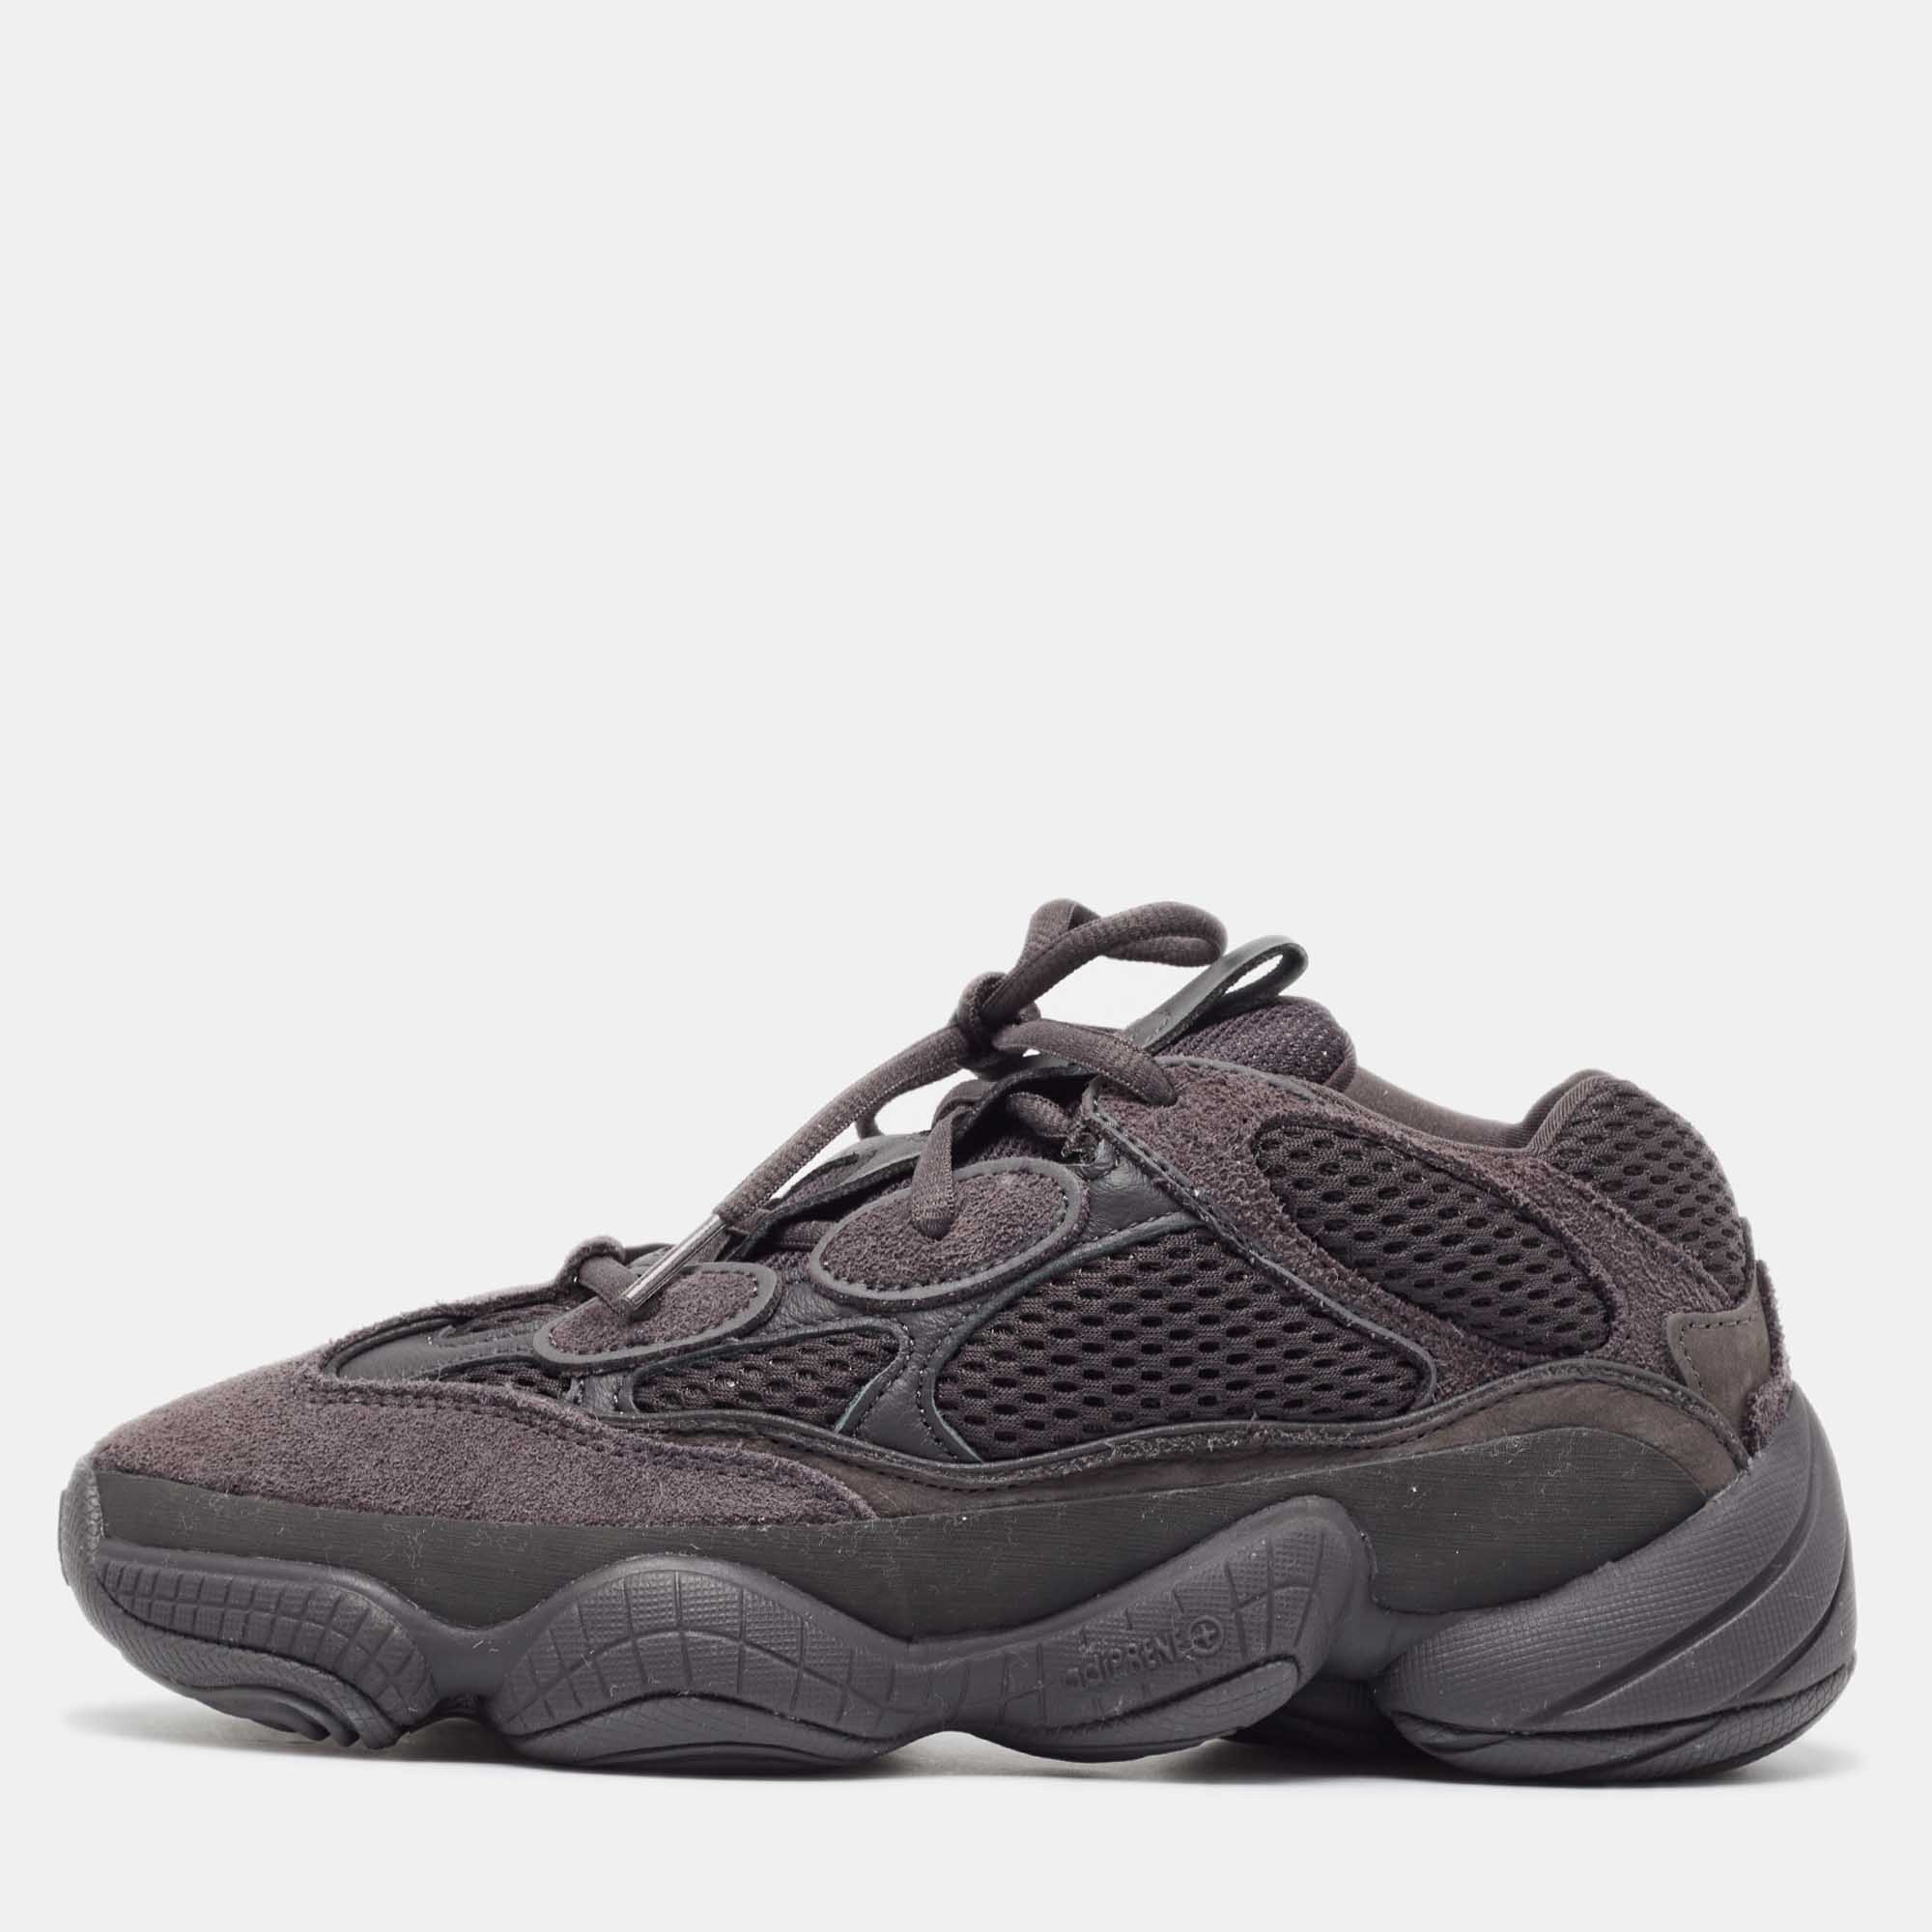 

Yeezy x Adidas Black Suede and Mesh Yeezy 500 Utility Black Sneakers Size 38 2/3